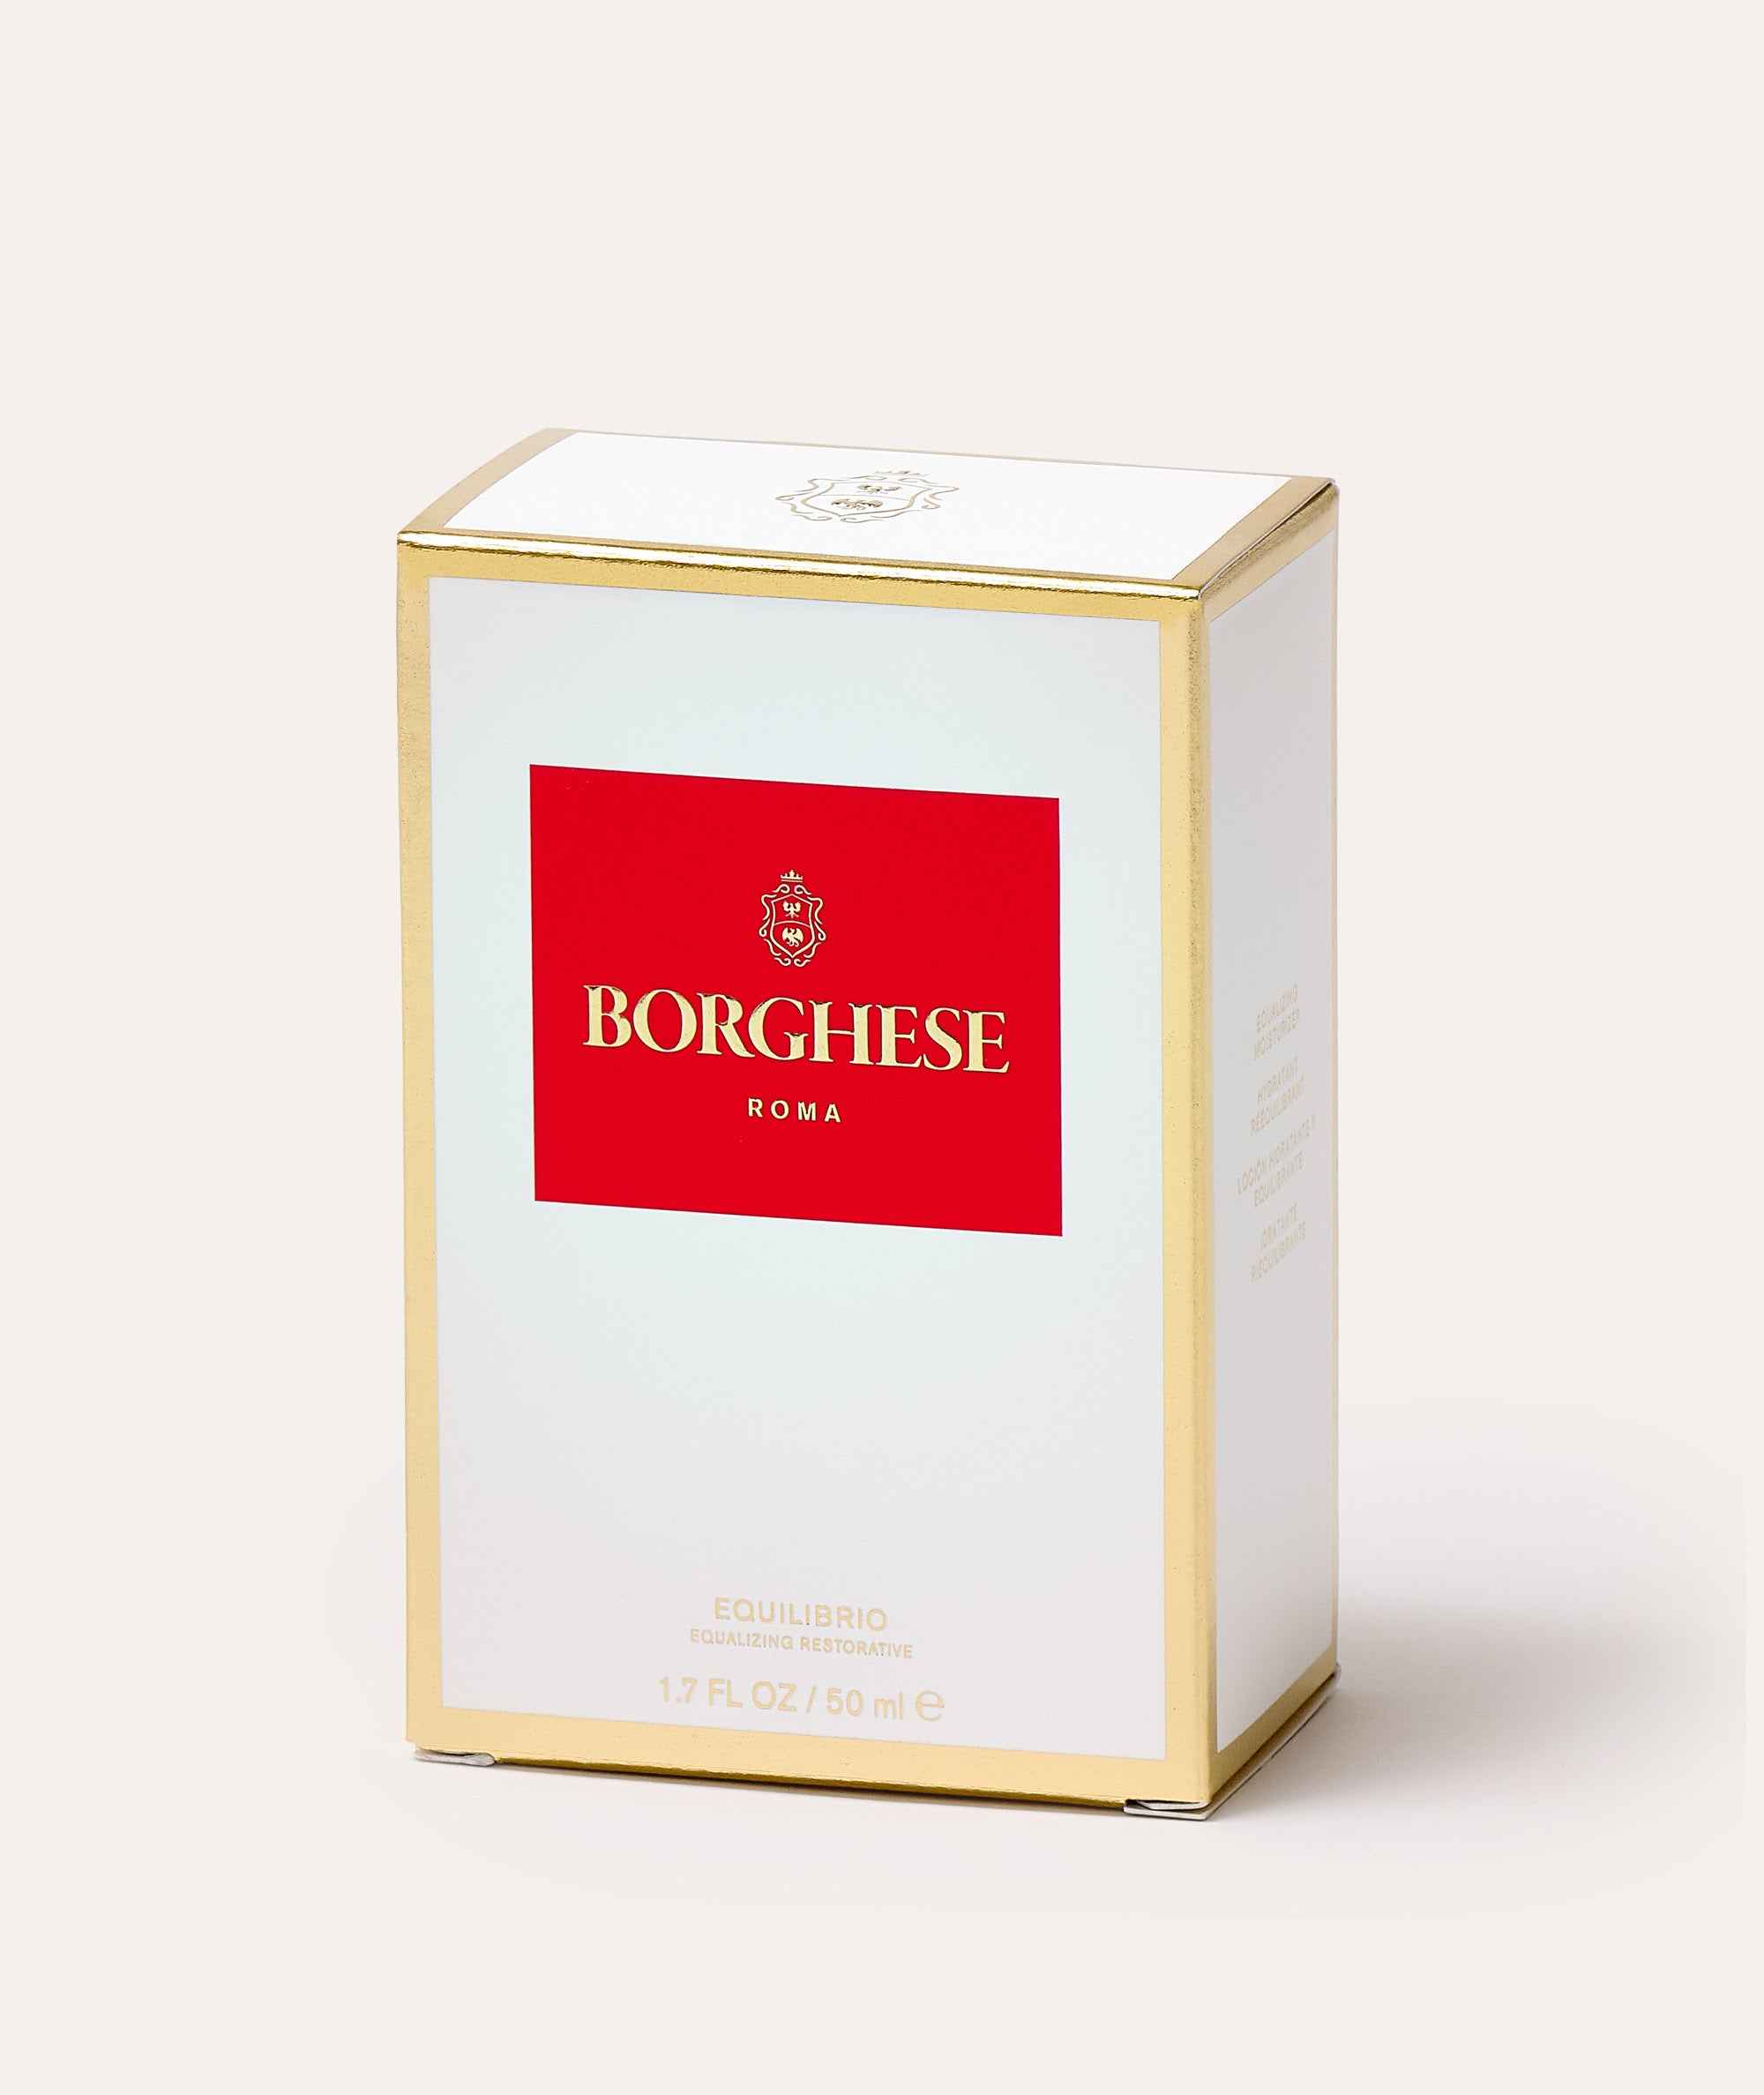 This is a picture of the Borghese Equilibrio Daily Moisturizer box